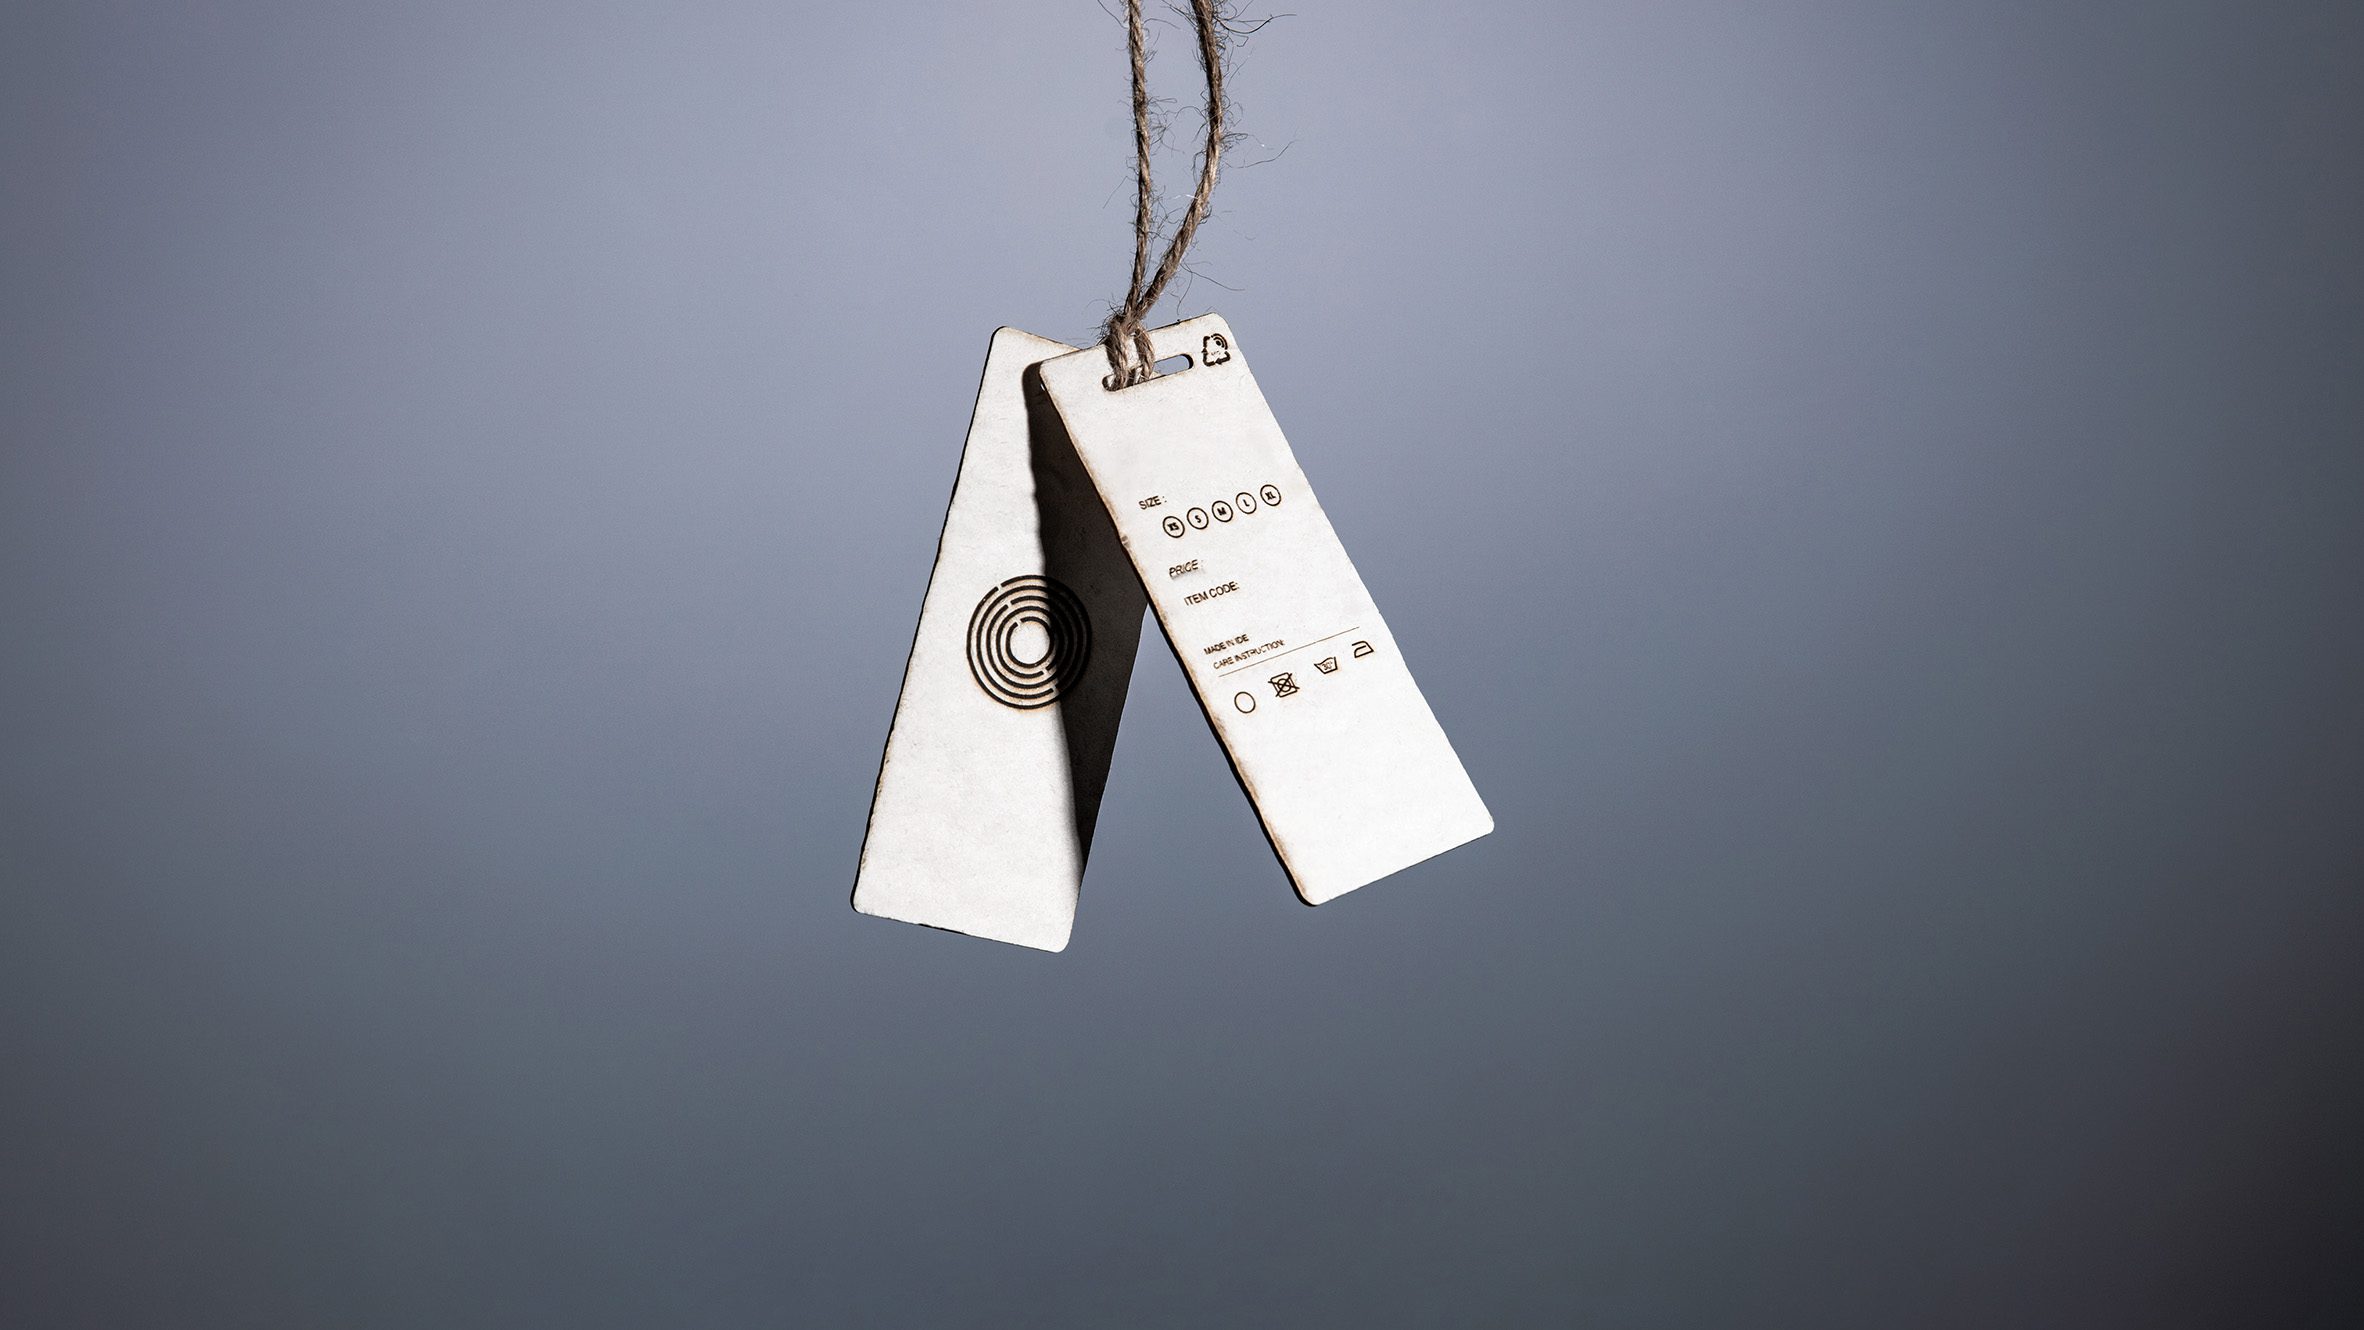 RFID Tags – How they work and why you should be using them